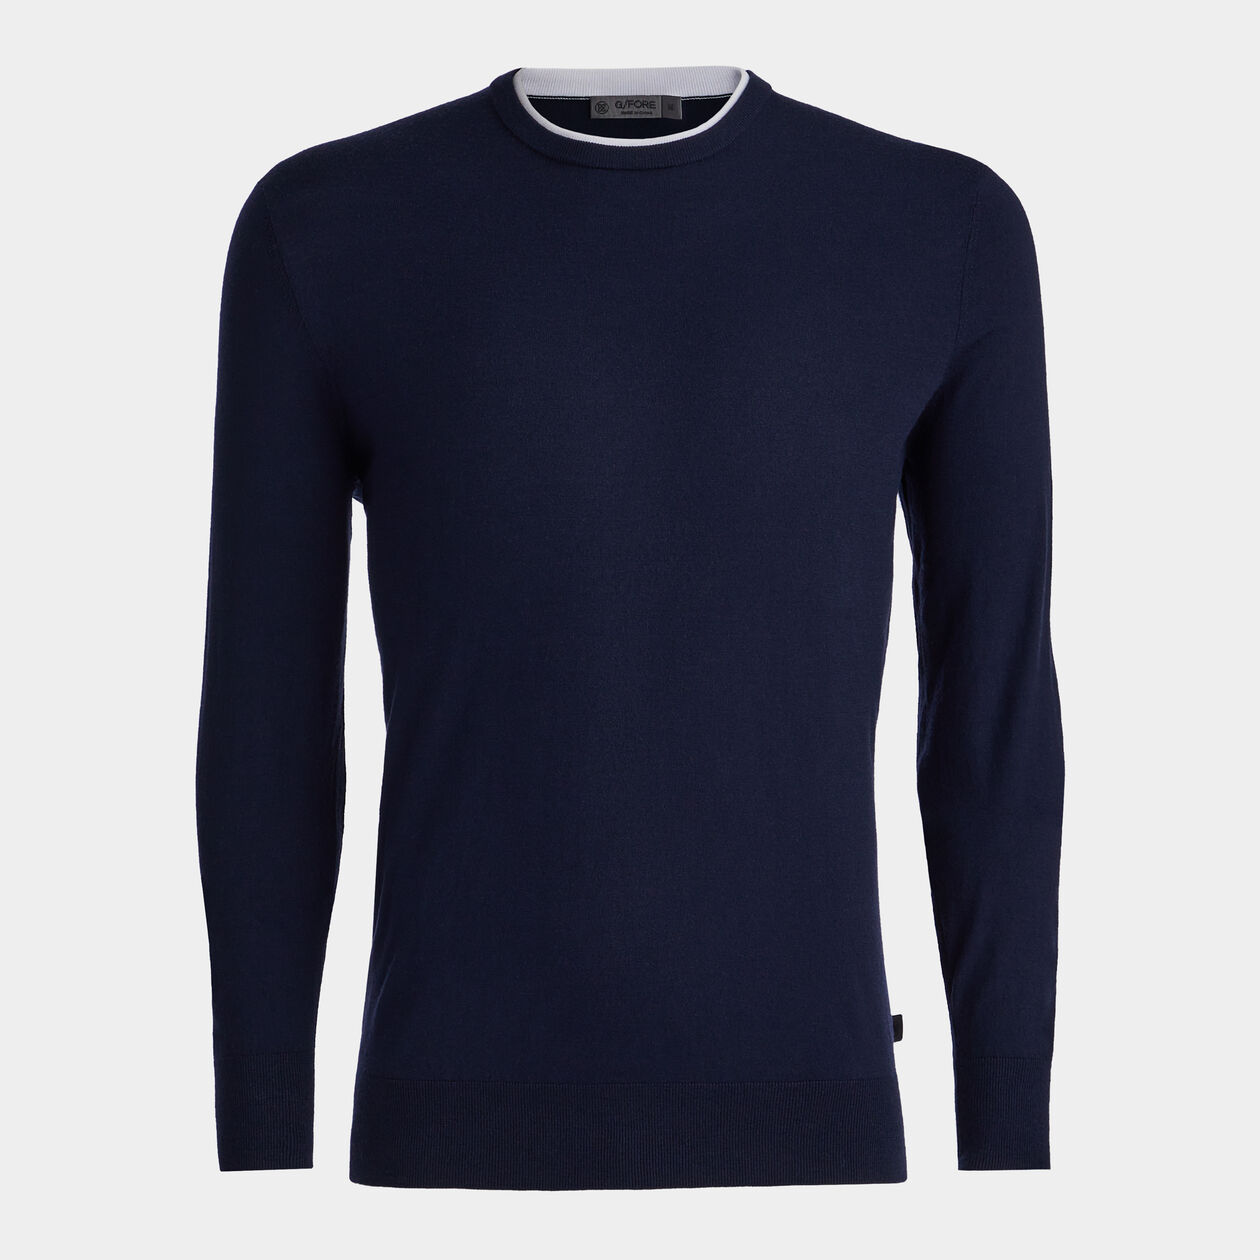 G/FORE Contrast Crew Sweater - Use Code "G4BREAKING8010" to Save 10%